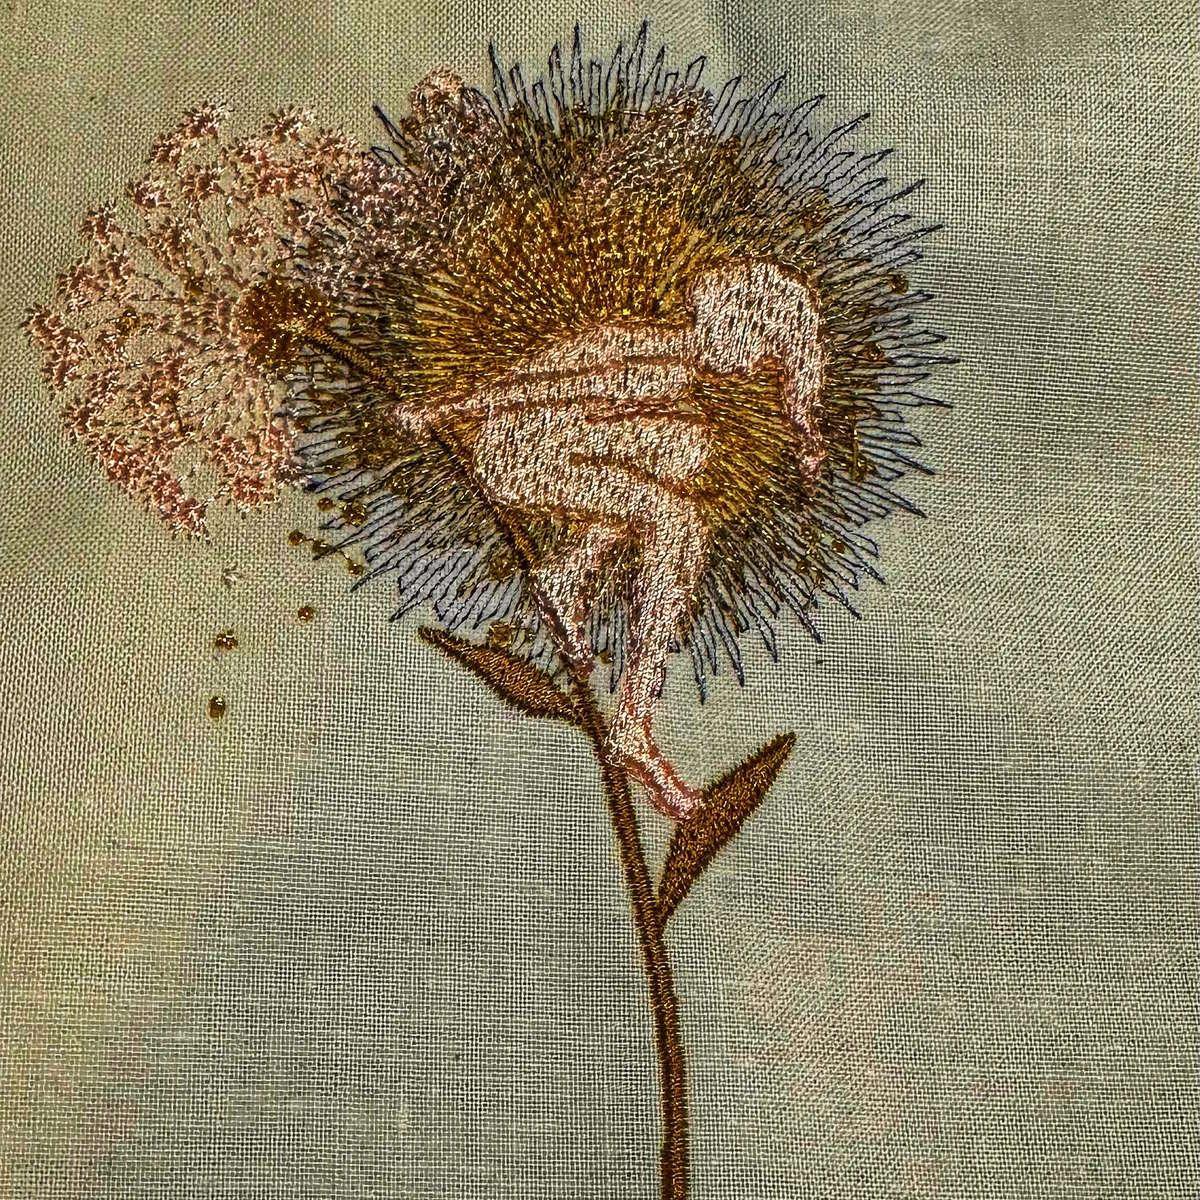 Fairy Dandelion Embroidery: A Magical Stitching Journey